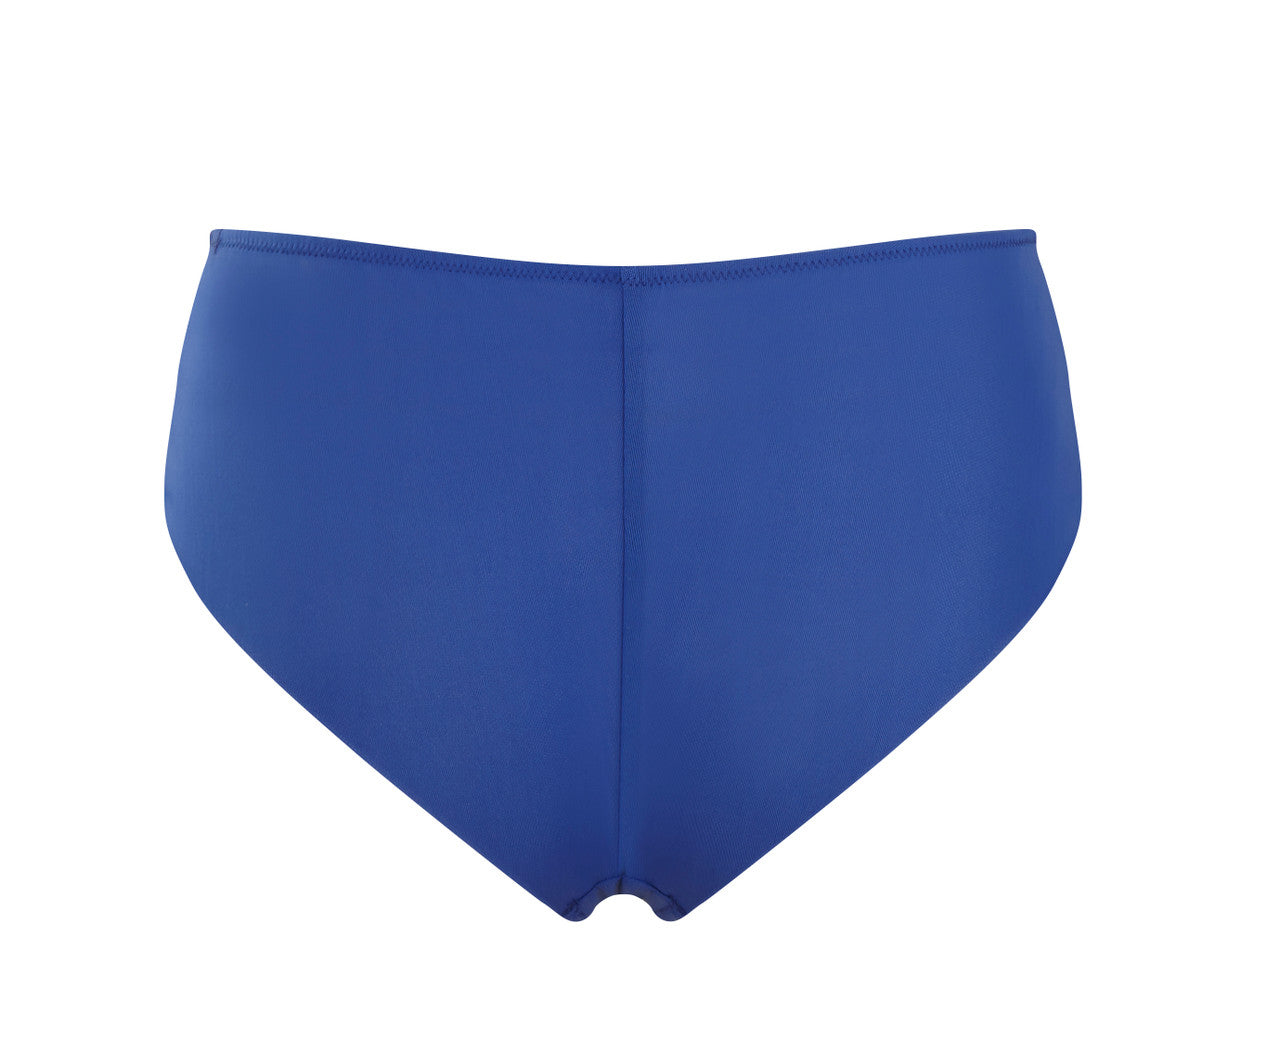 Ana Brief - Blue Jewel, back view product image